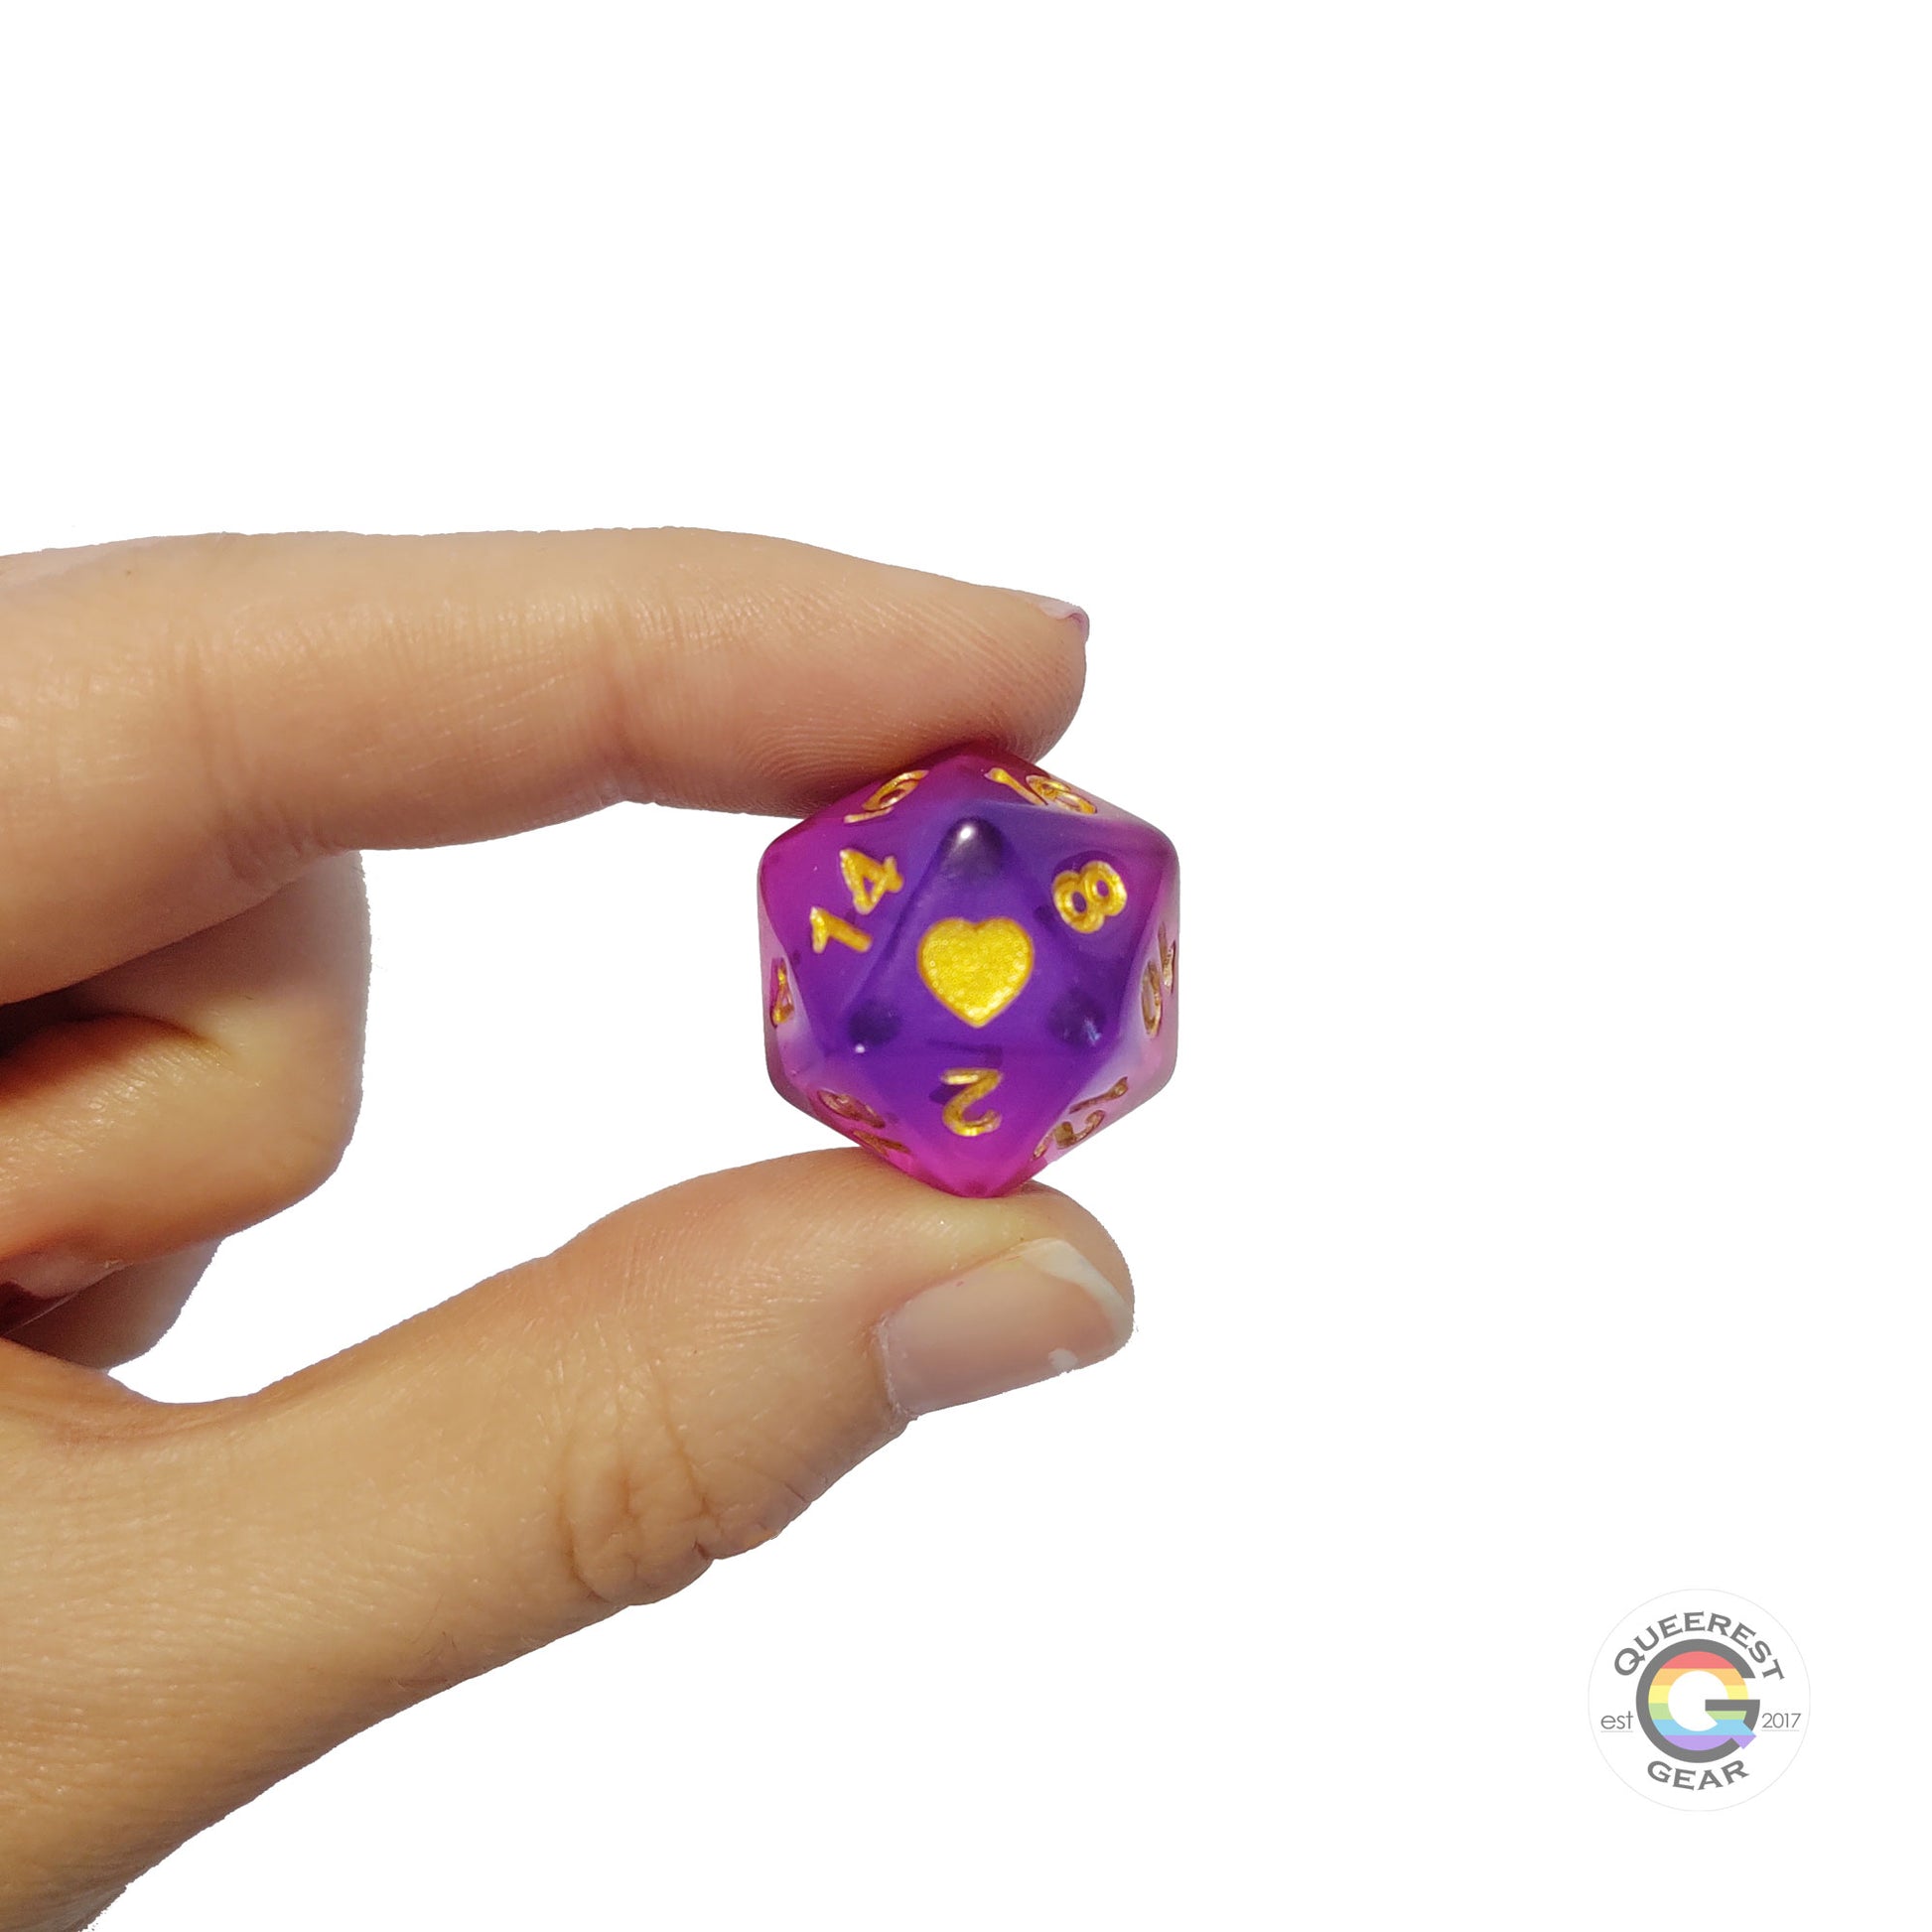 A hand holding up the bisexual d20 to show off the color, heart, and transparency